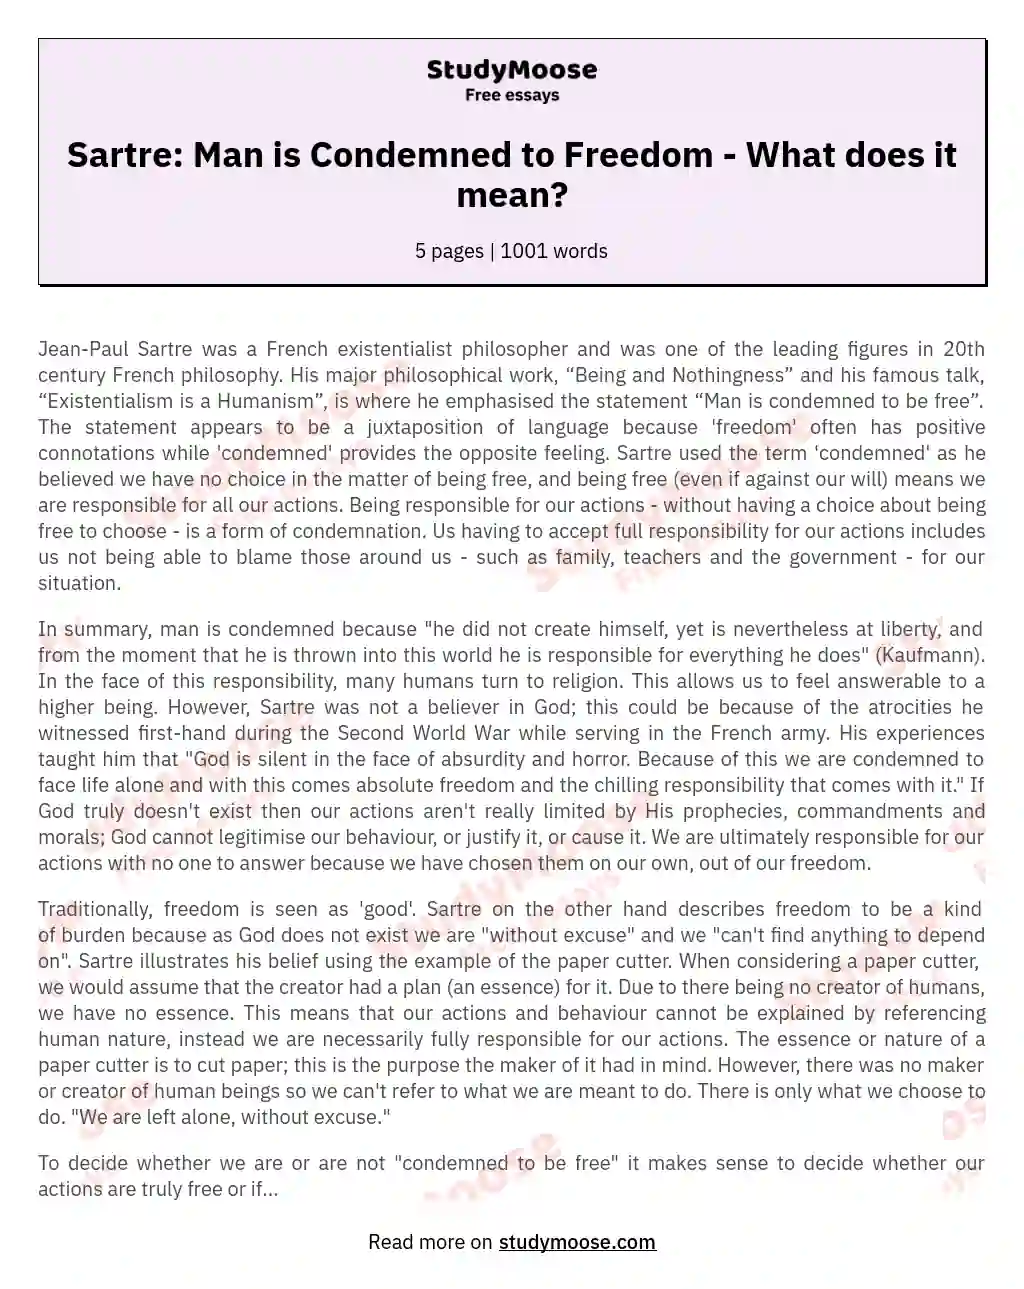 Sartre: Man is Condemned to Freedom - What does it mean? essay